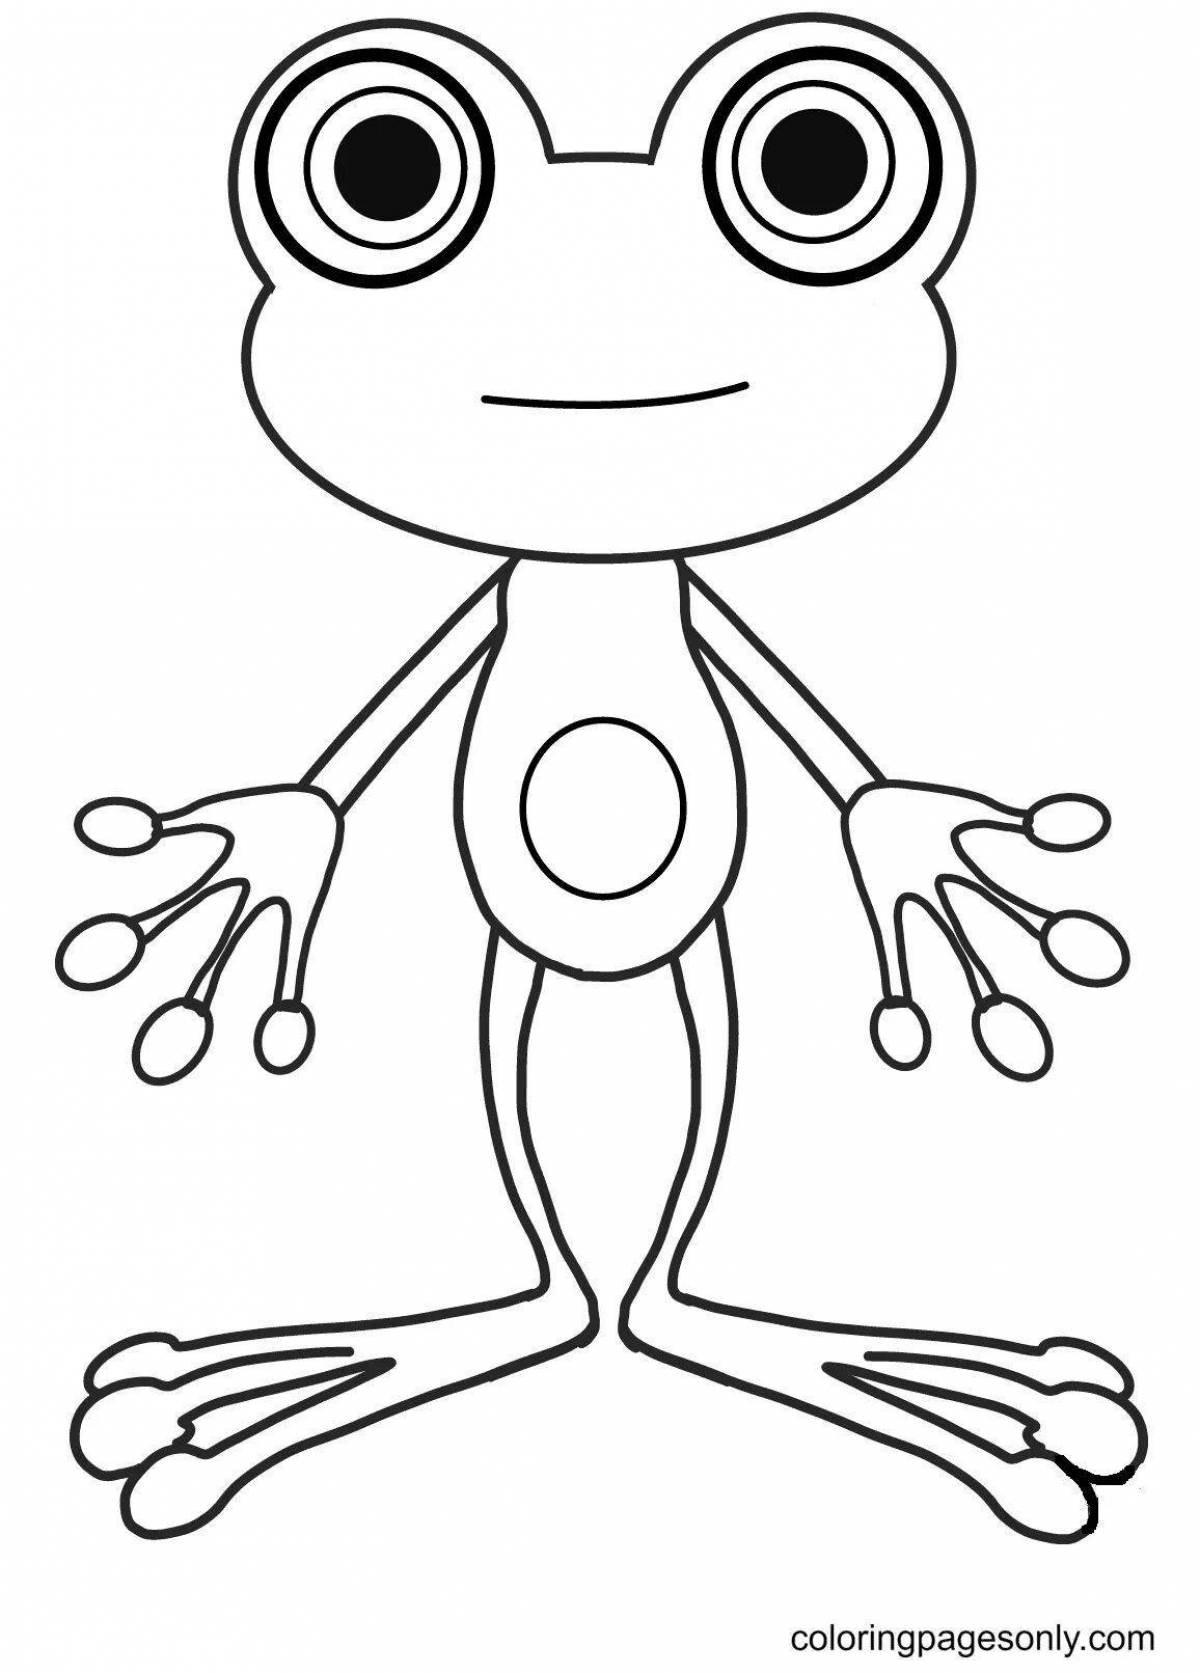 Luminous frog coloring page